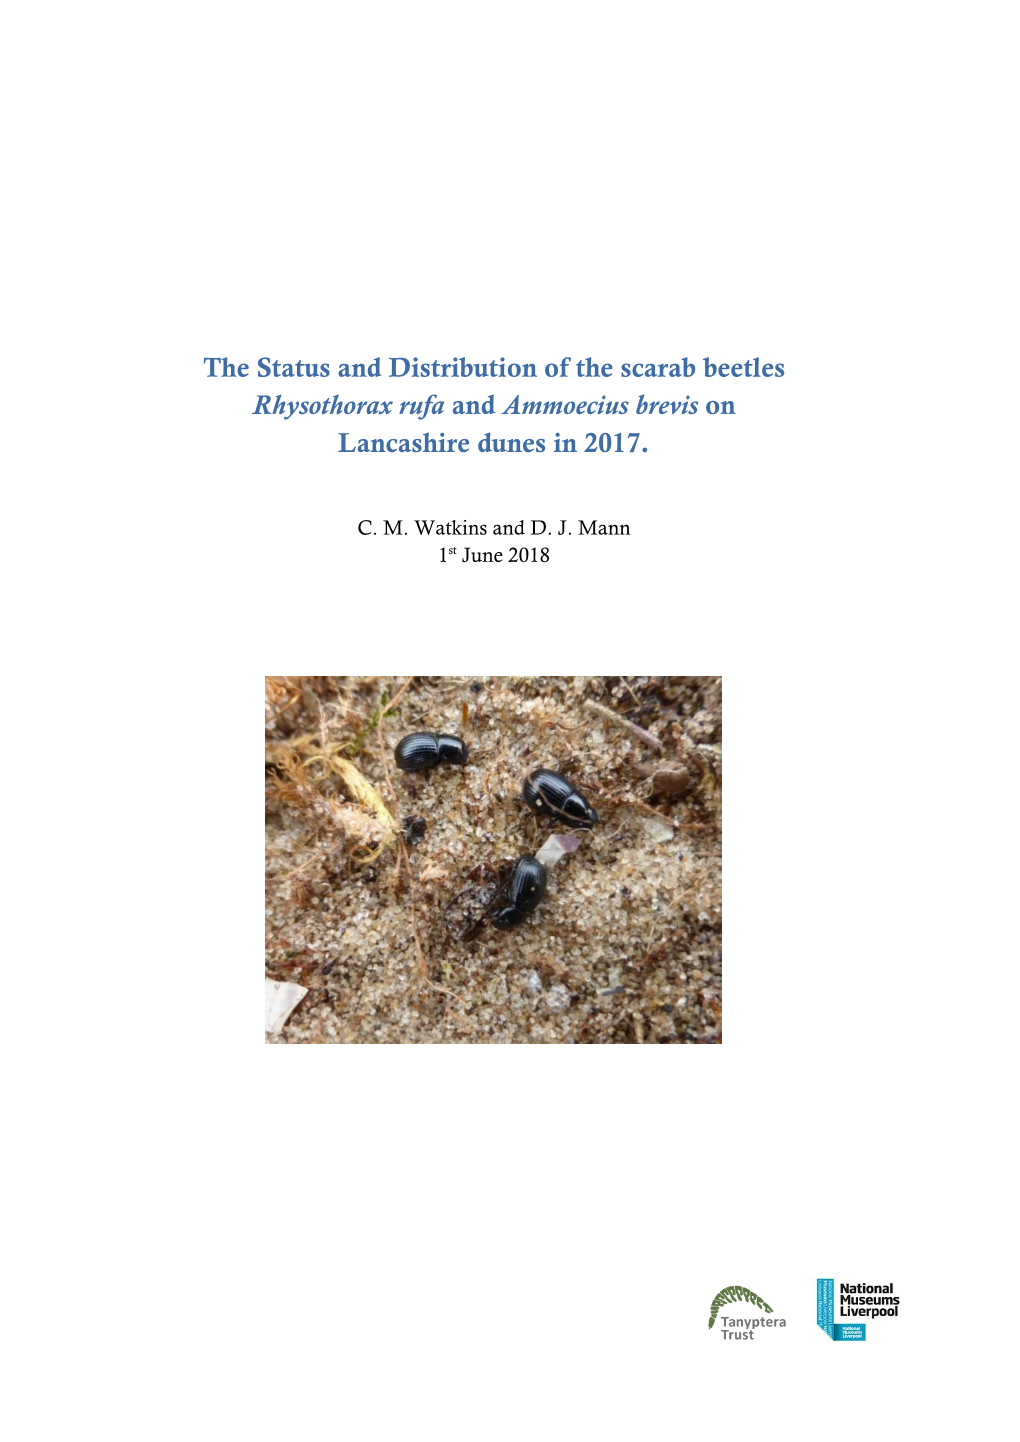 The Status and Distribution of the Scarab Beetles Rhysothorax Rufa and Ammoecius Brevis on Lancashire Dunes in 2017